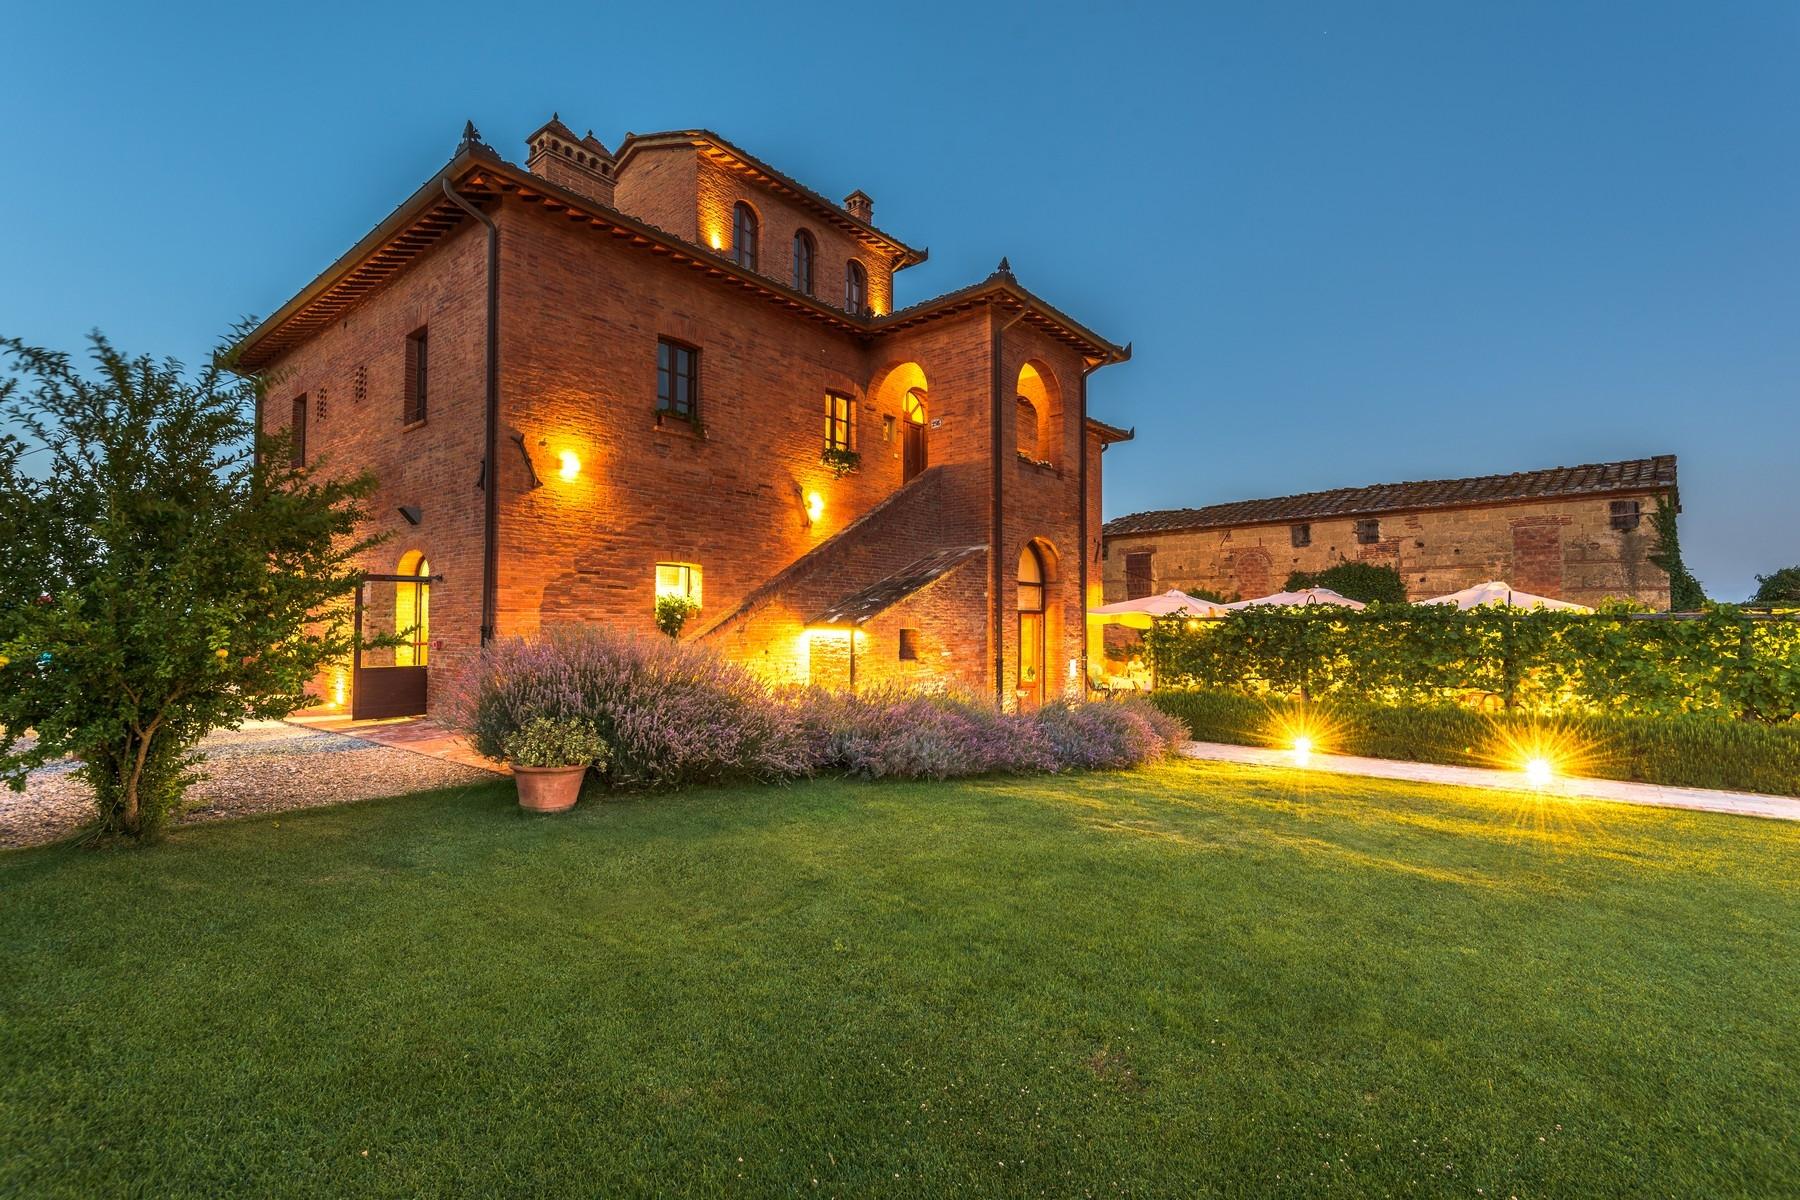 Country hotel with adjacent private villa near Siena - 29